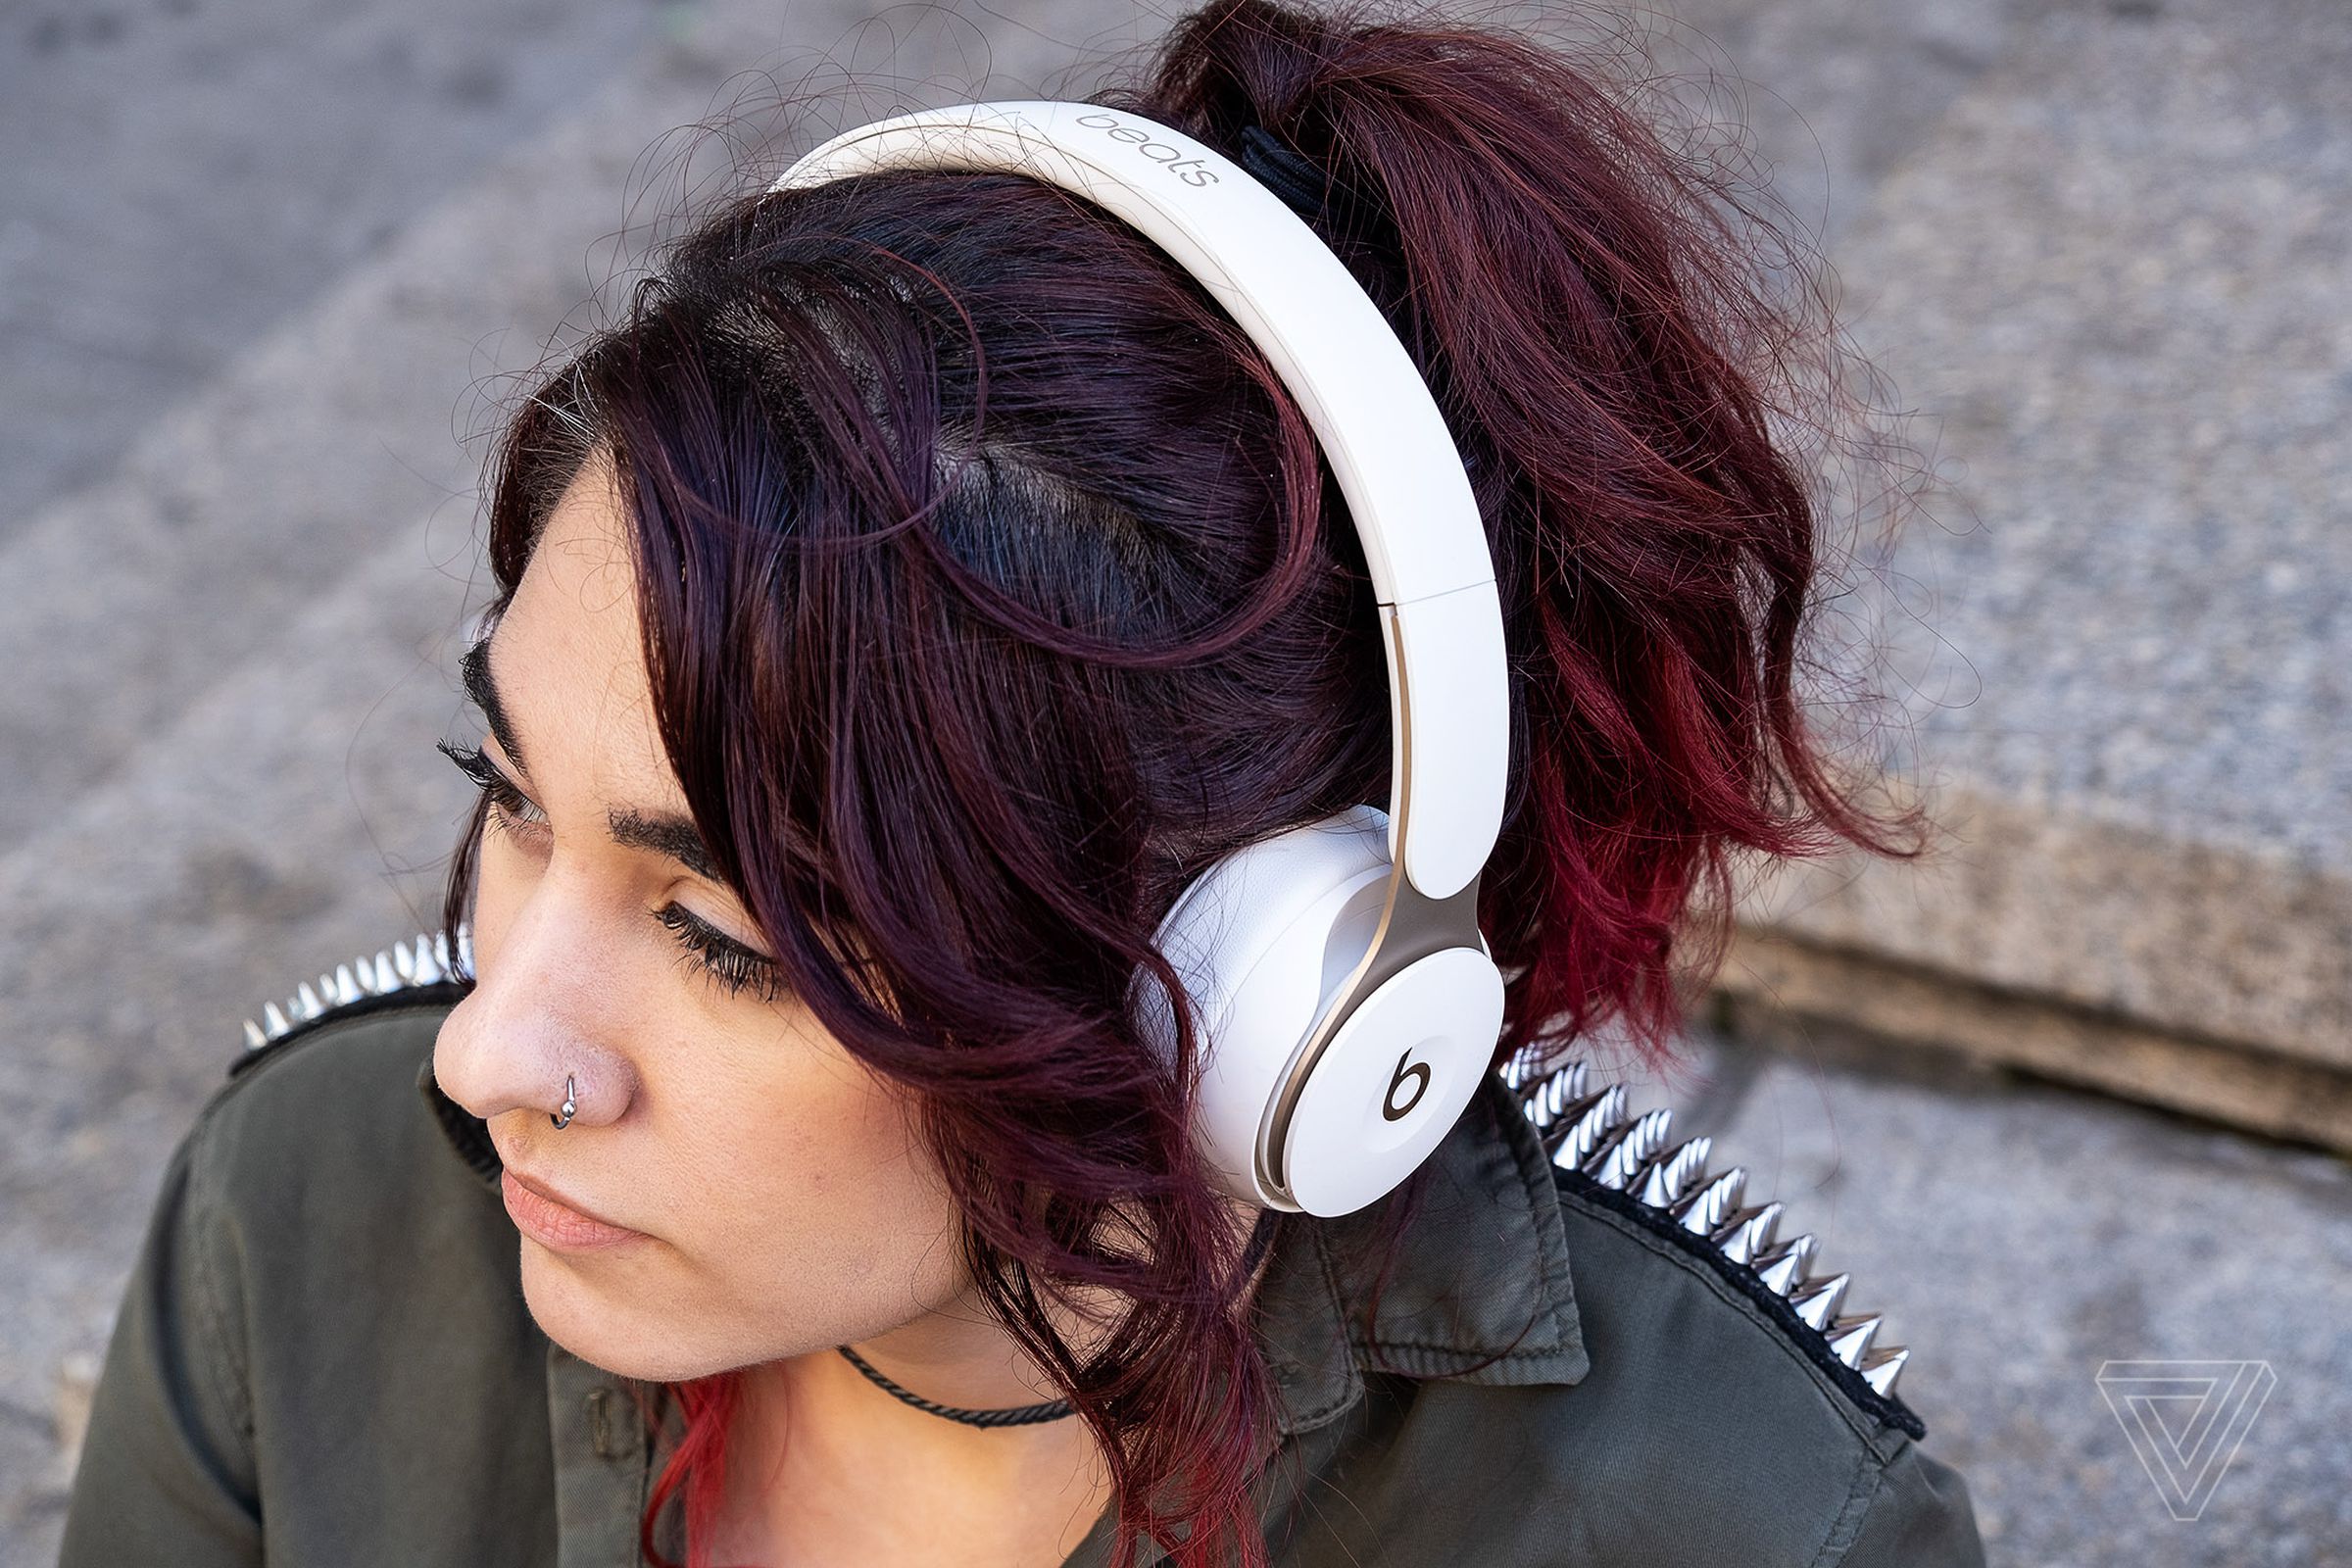 A photo of the Beats Solo Pro headphones, the best on-ear noise-canceling headphones, worn on a woman’s head.